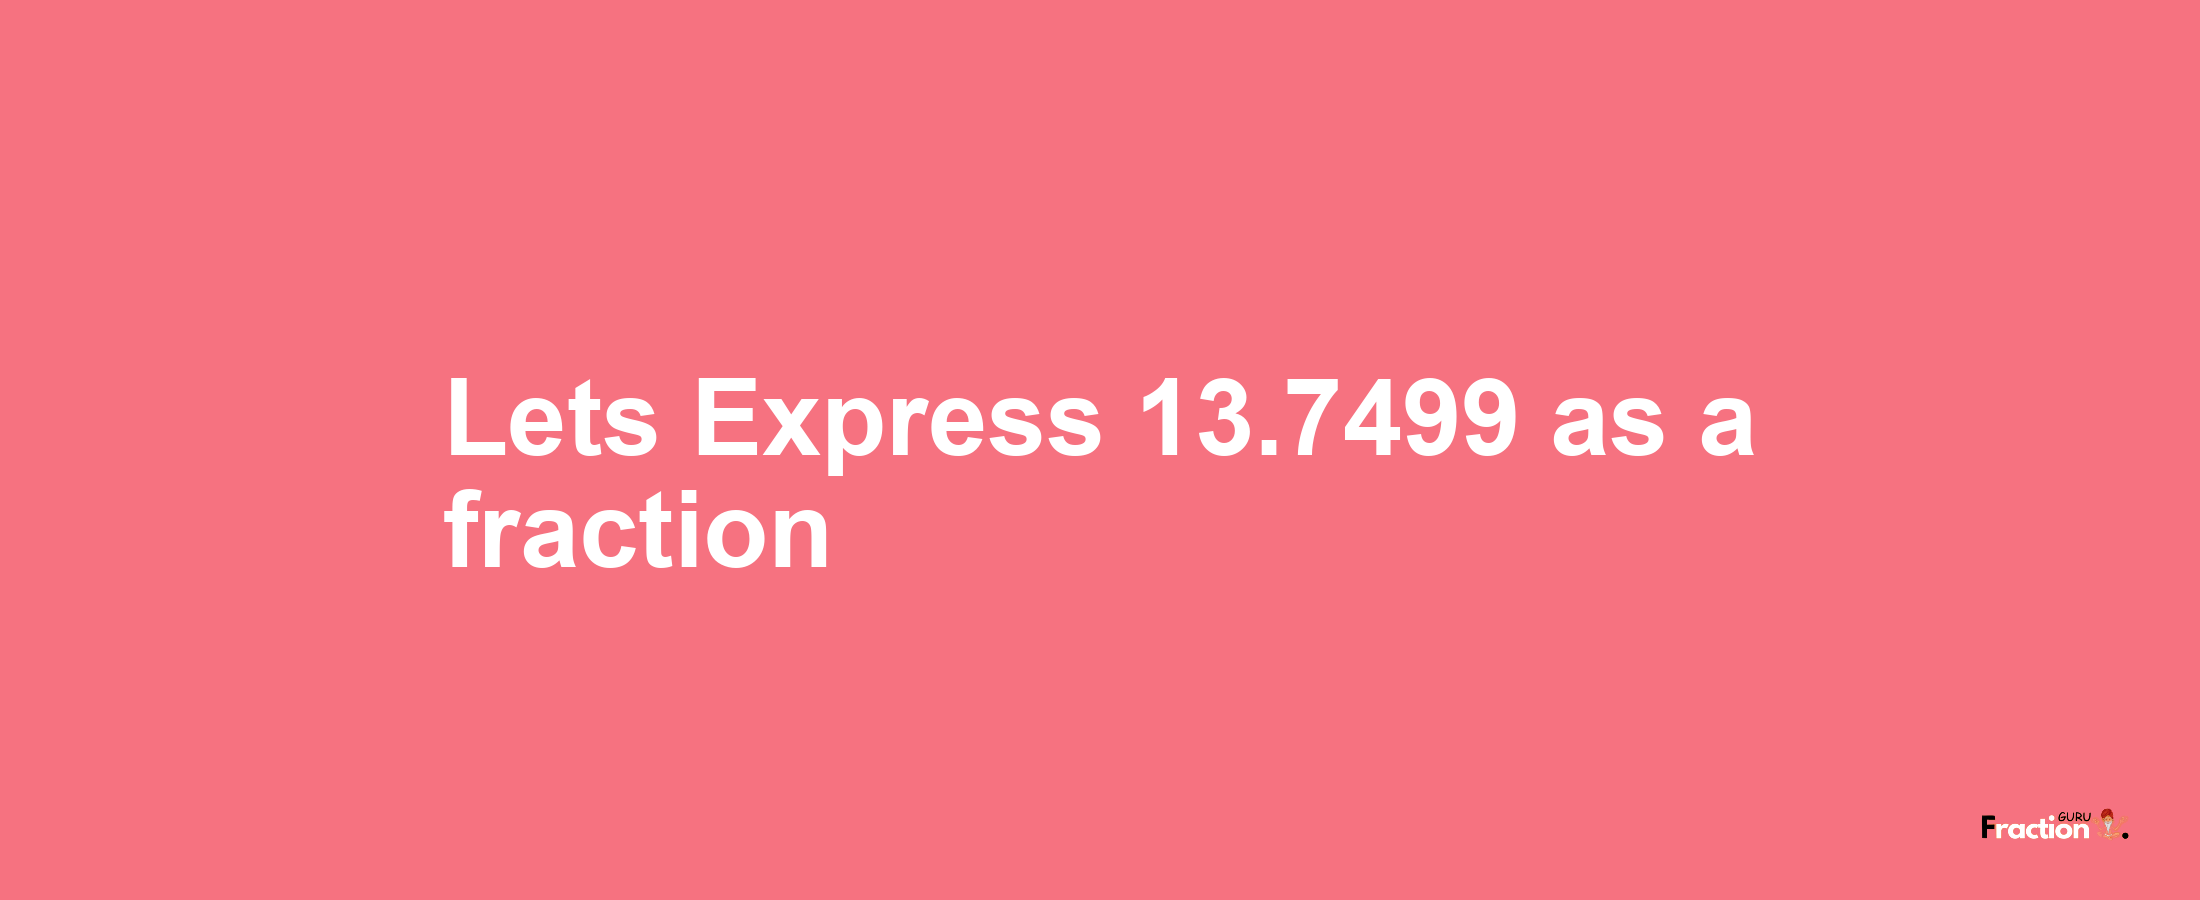 Lets Express 13.7499 as afraction